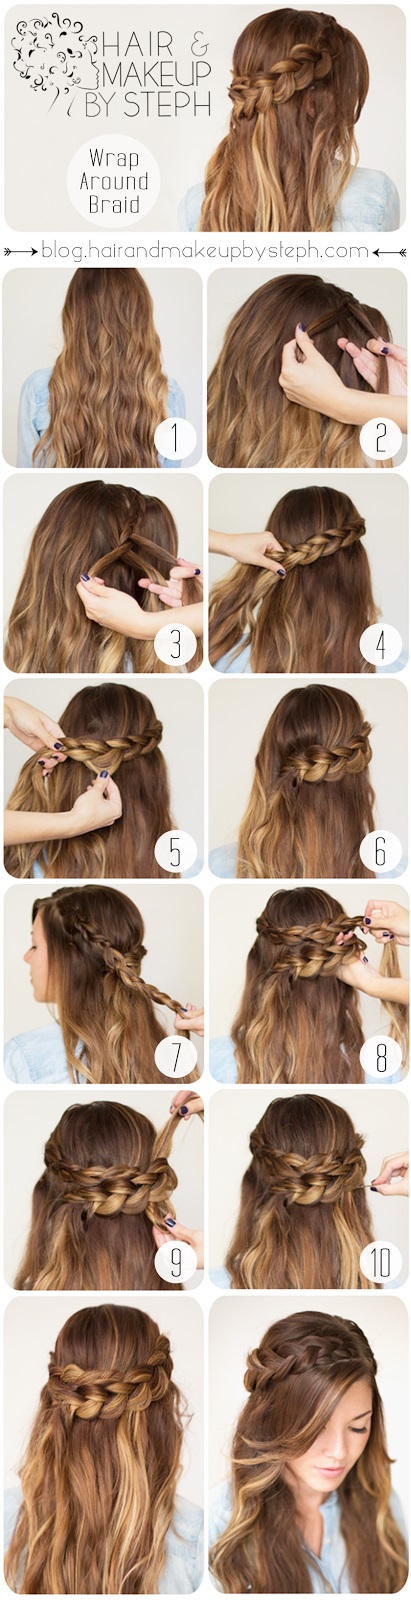 How To Do Hairstyles | maomaotxt.com